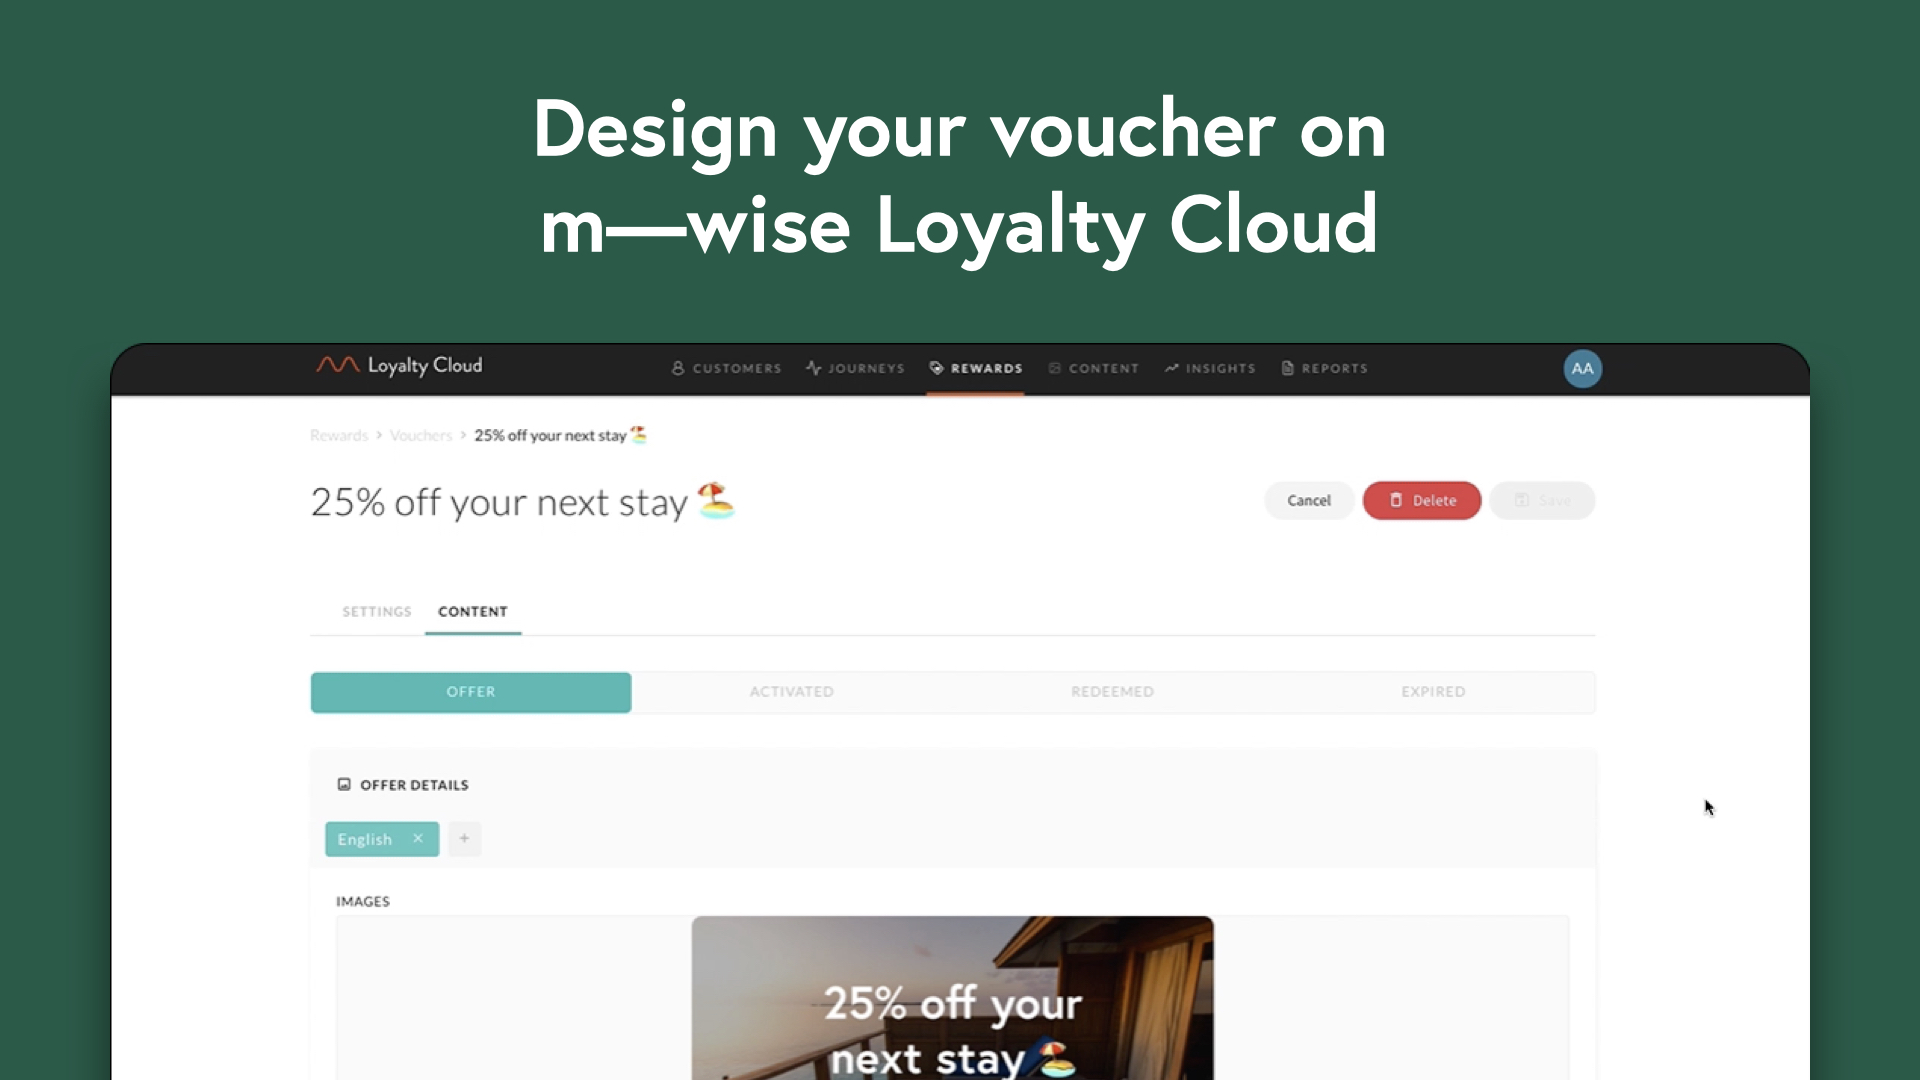 Voucher design screen on m—wise Loyalty Cloud